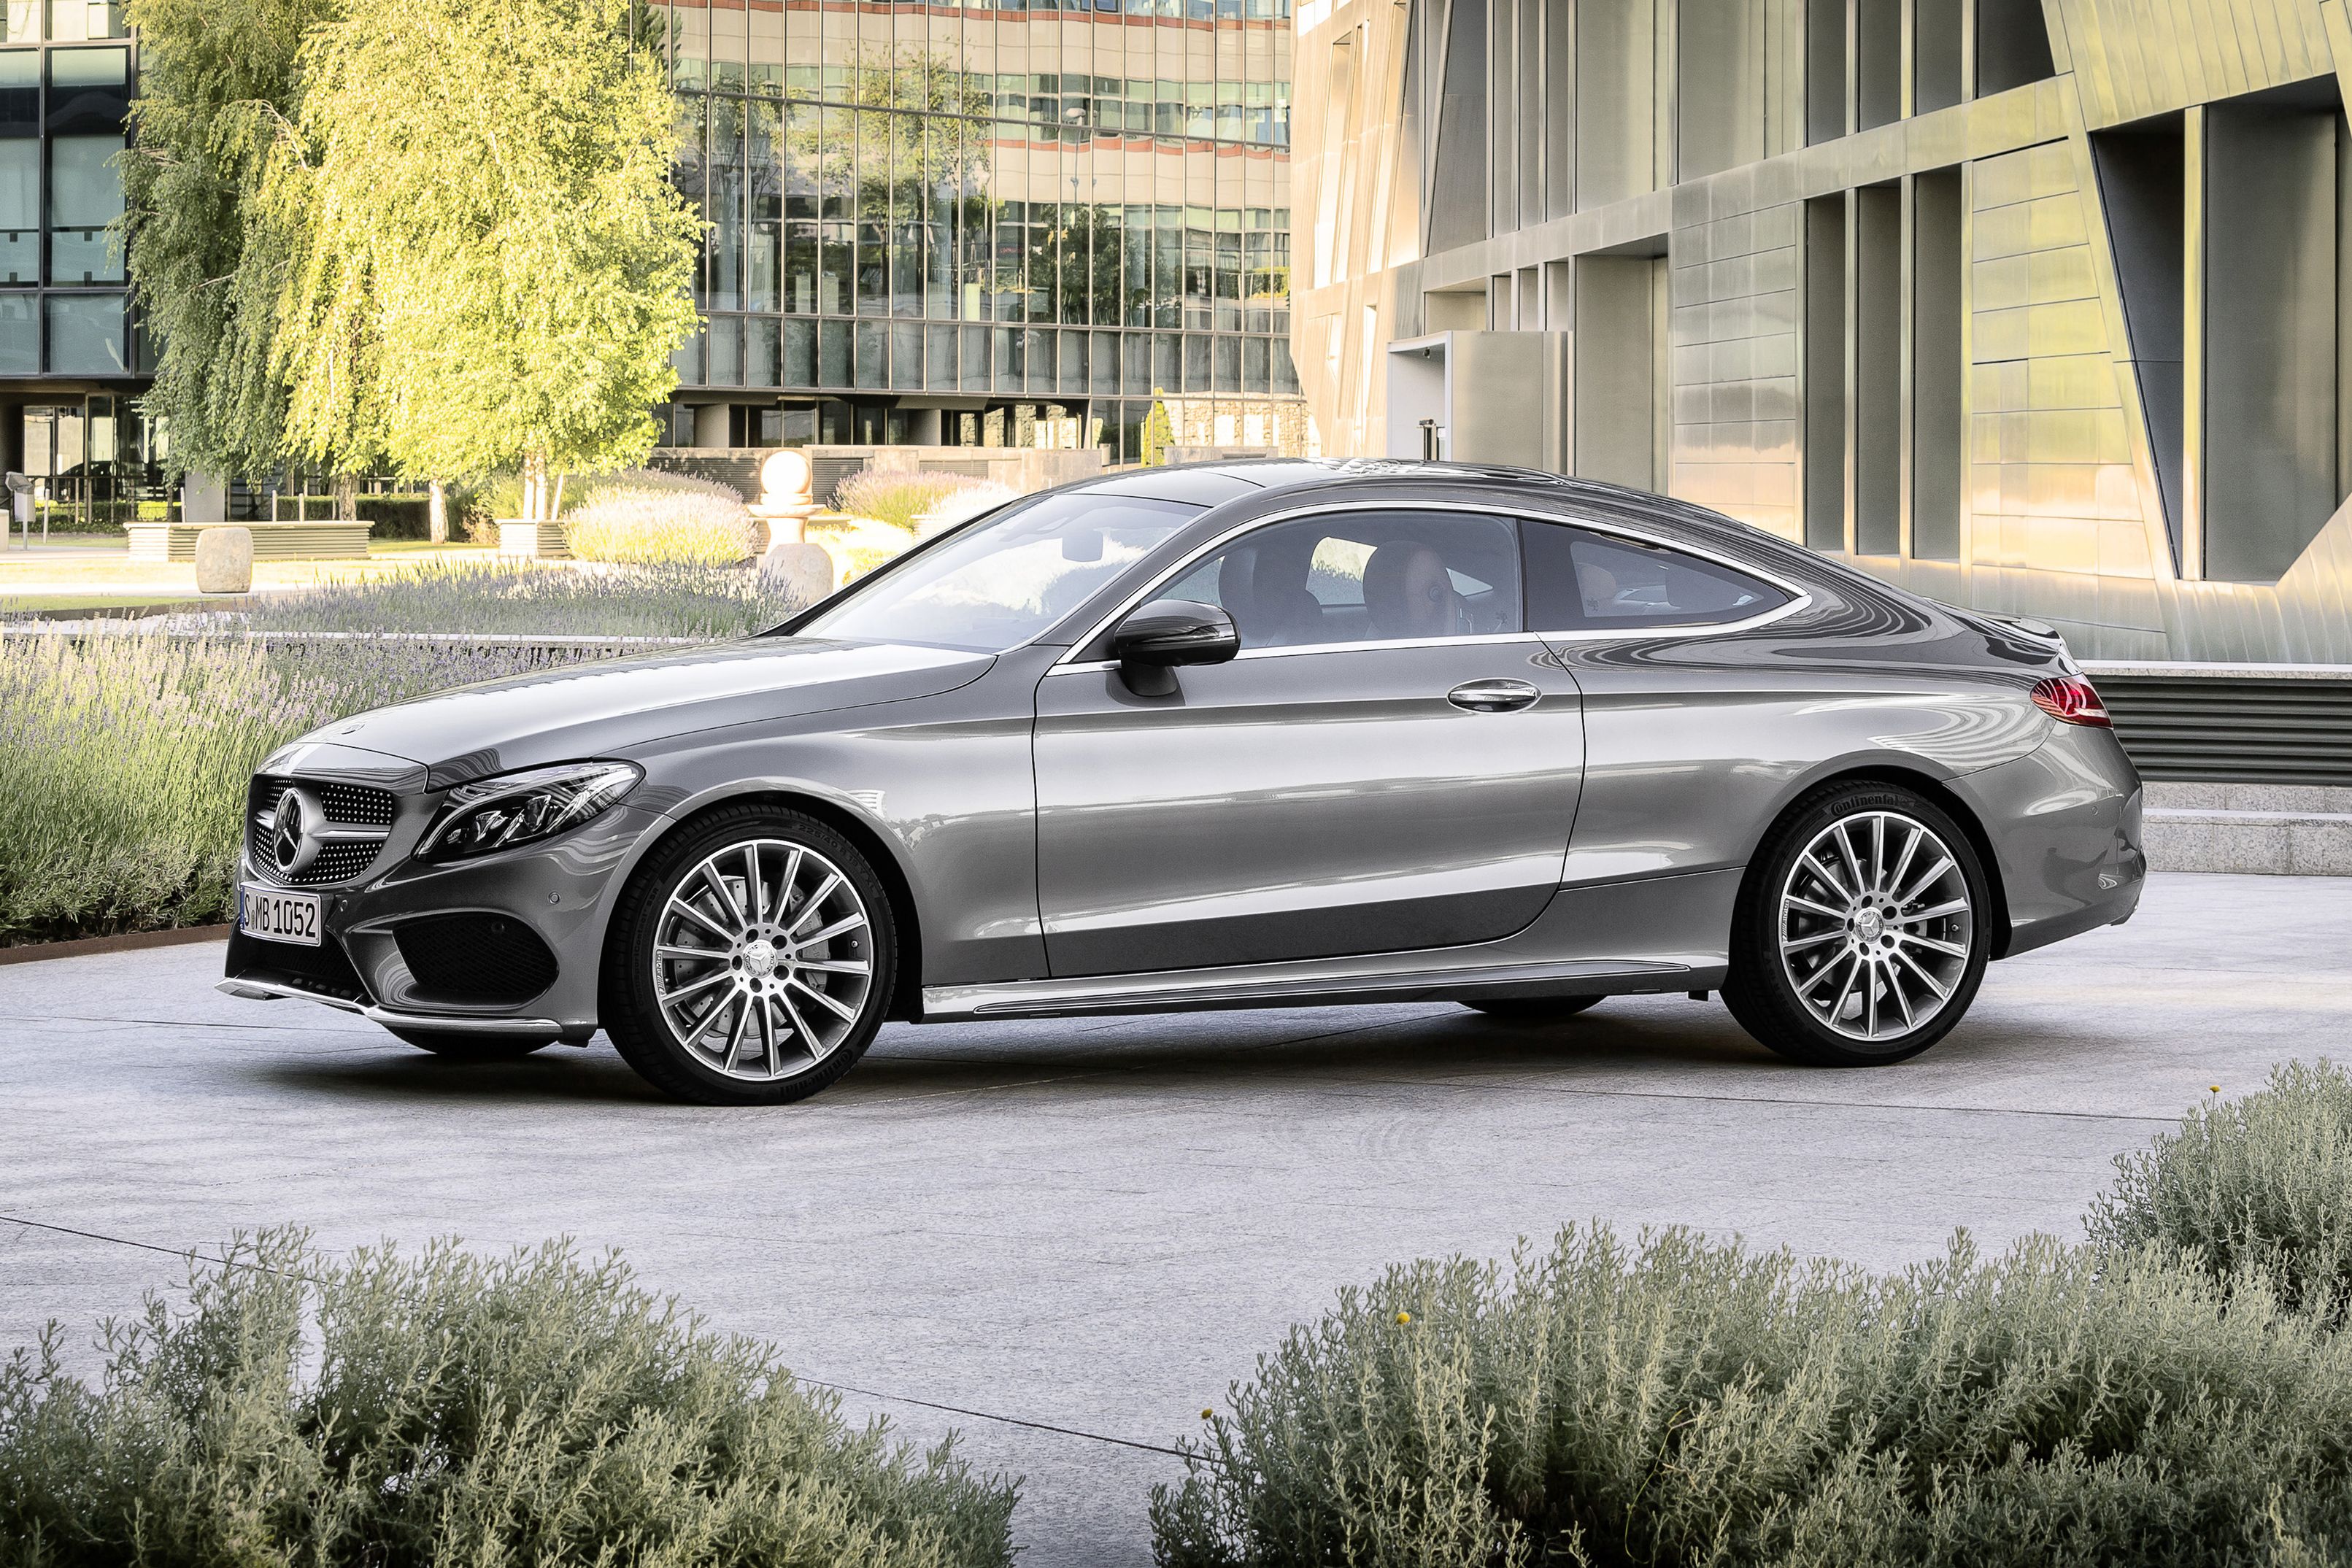 Mercedes Benz C Class Features And Specs